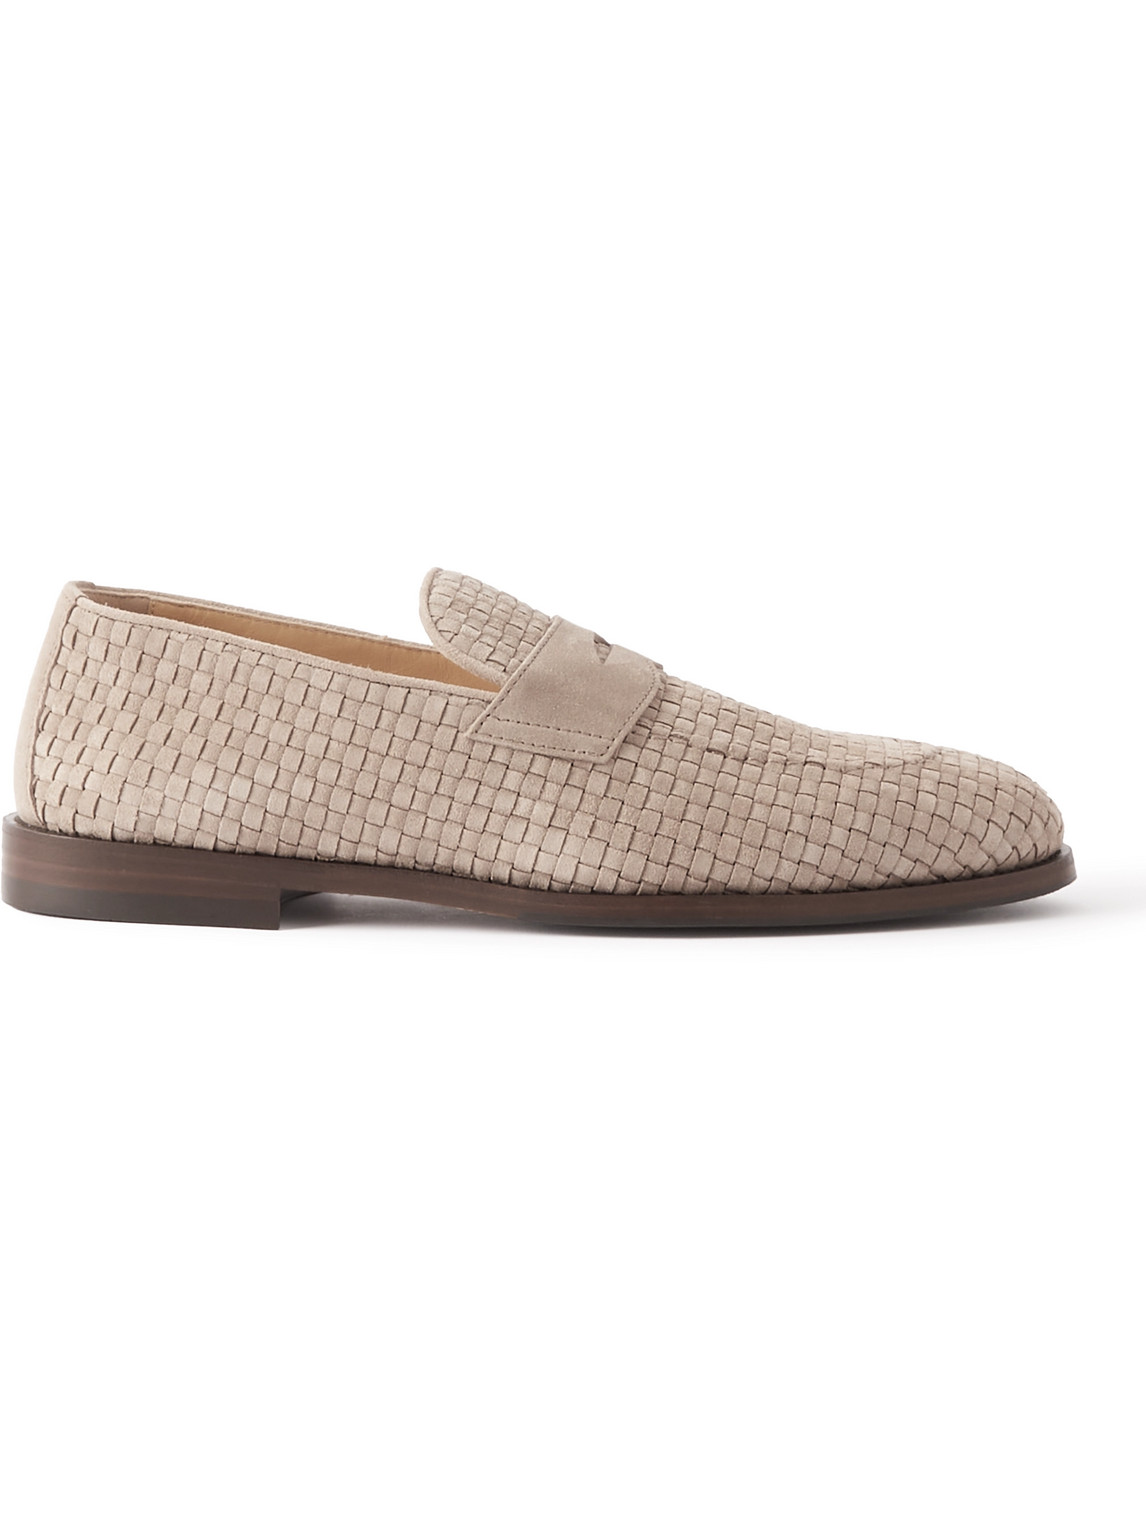 Brunello Cucinelli Woven Suede Penny Loafers In Neutrals